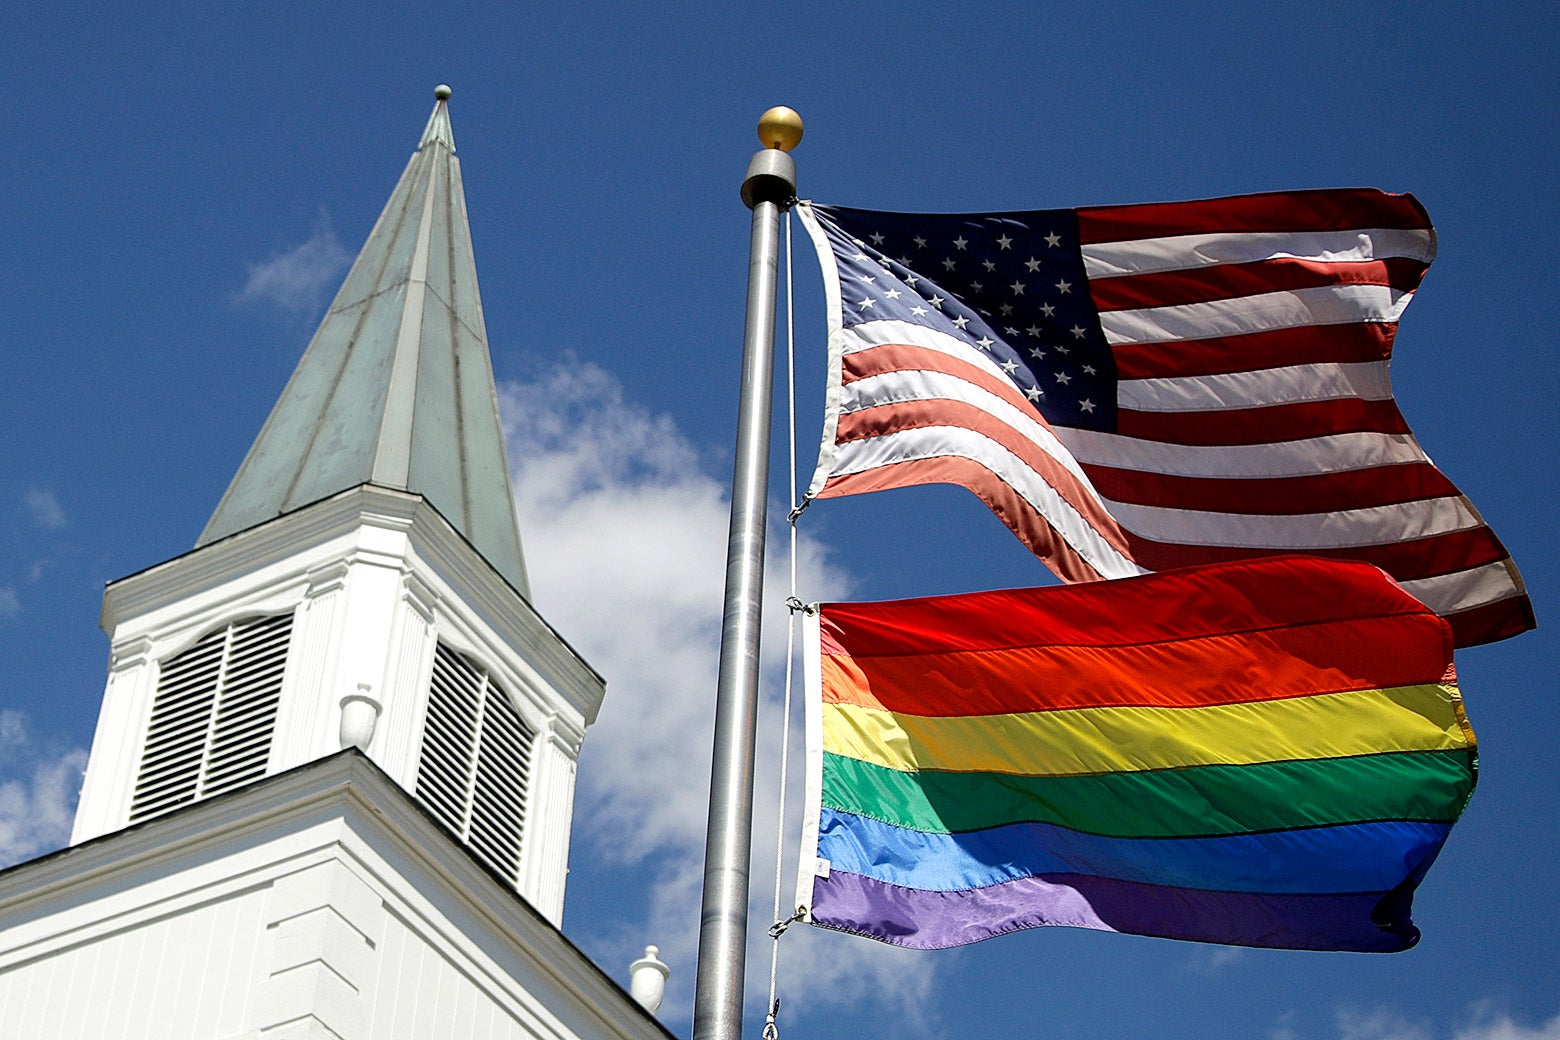 A rainbow flag flies along with the U.S. flag in front of a Methodist church.